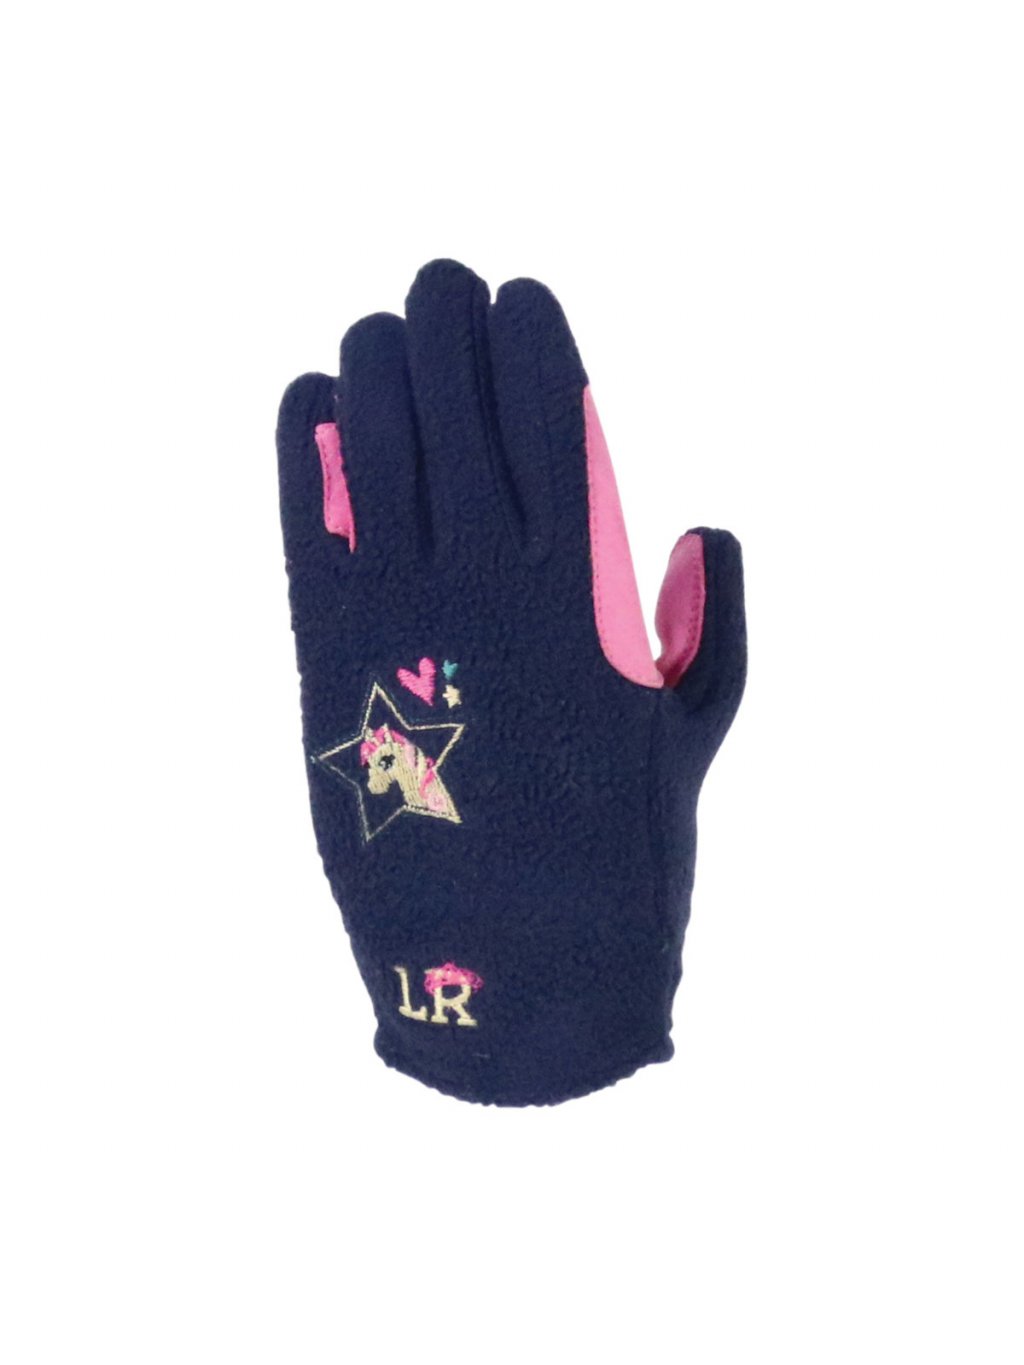 PR 30356 I Love My Pony Collection Fleece Gloves by Little Rider 01